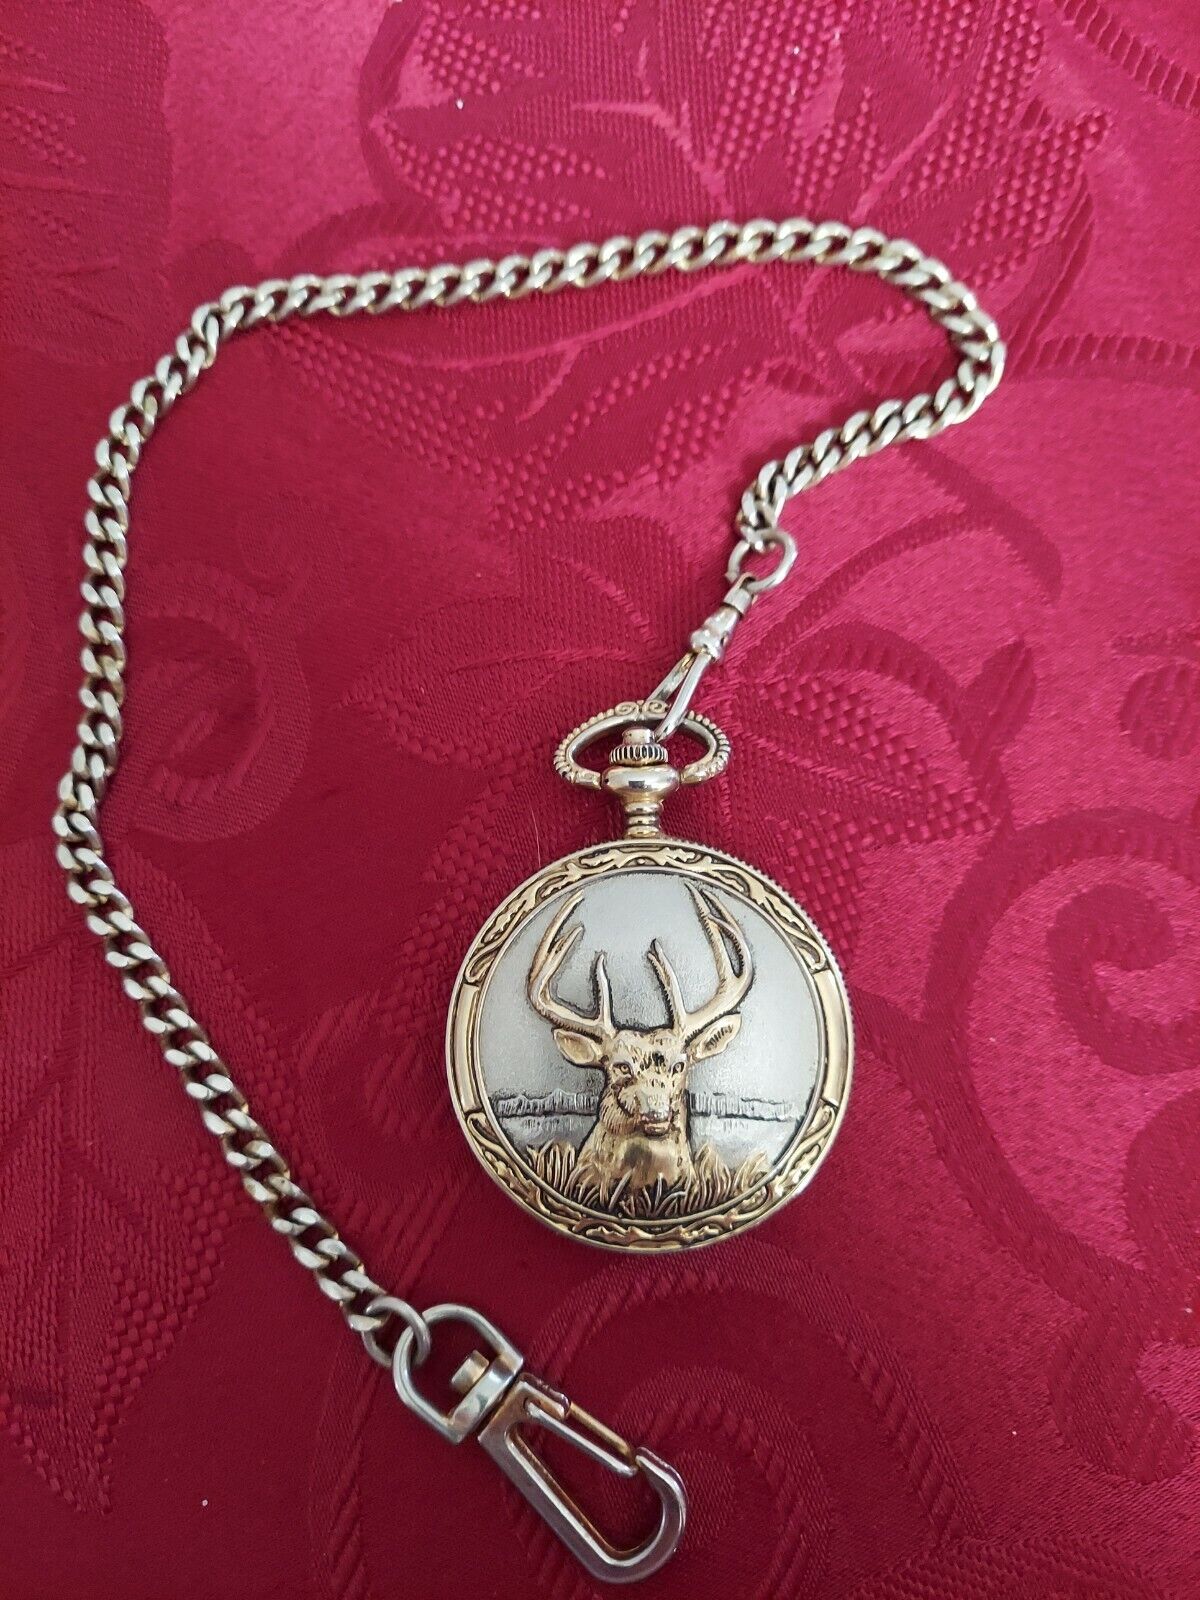 Crowe Majestic Gold & Silver tone pocket watch Buck Deer Signature Series parts